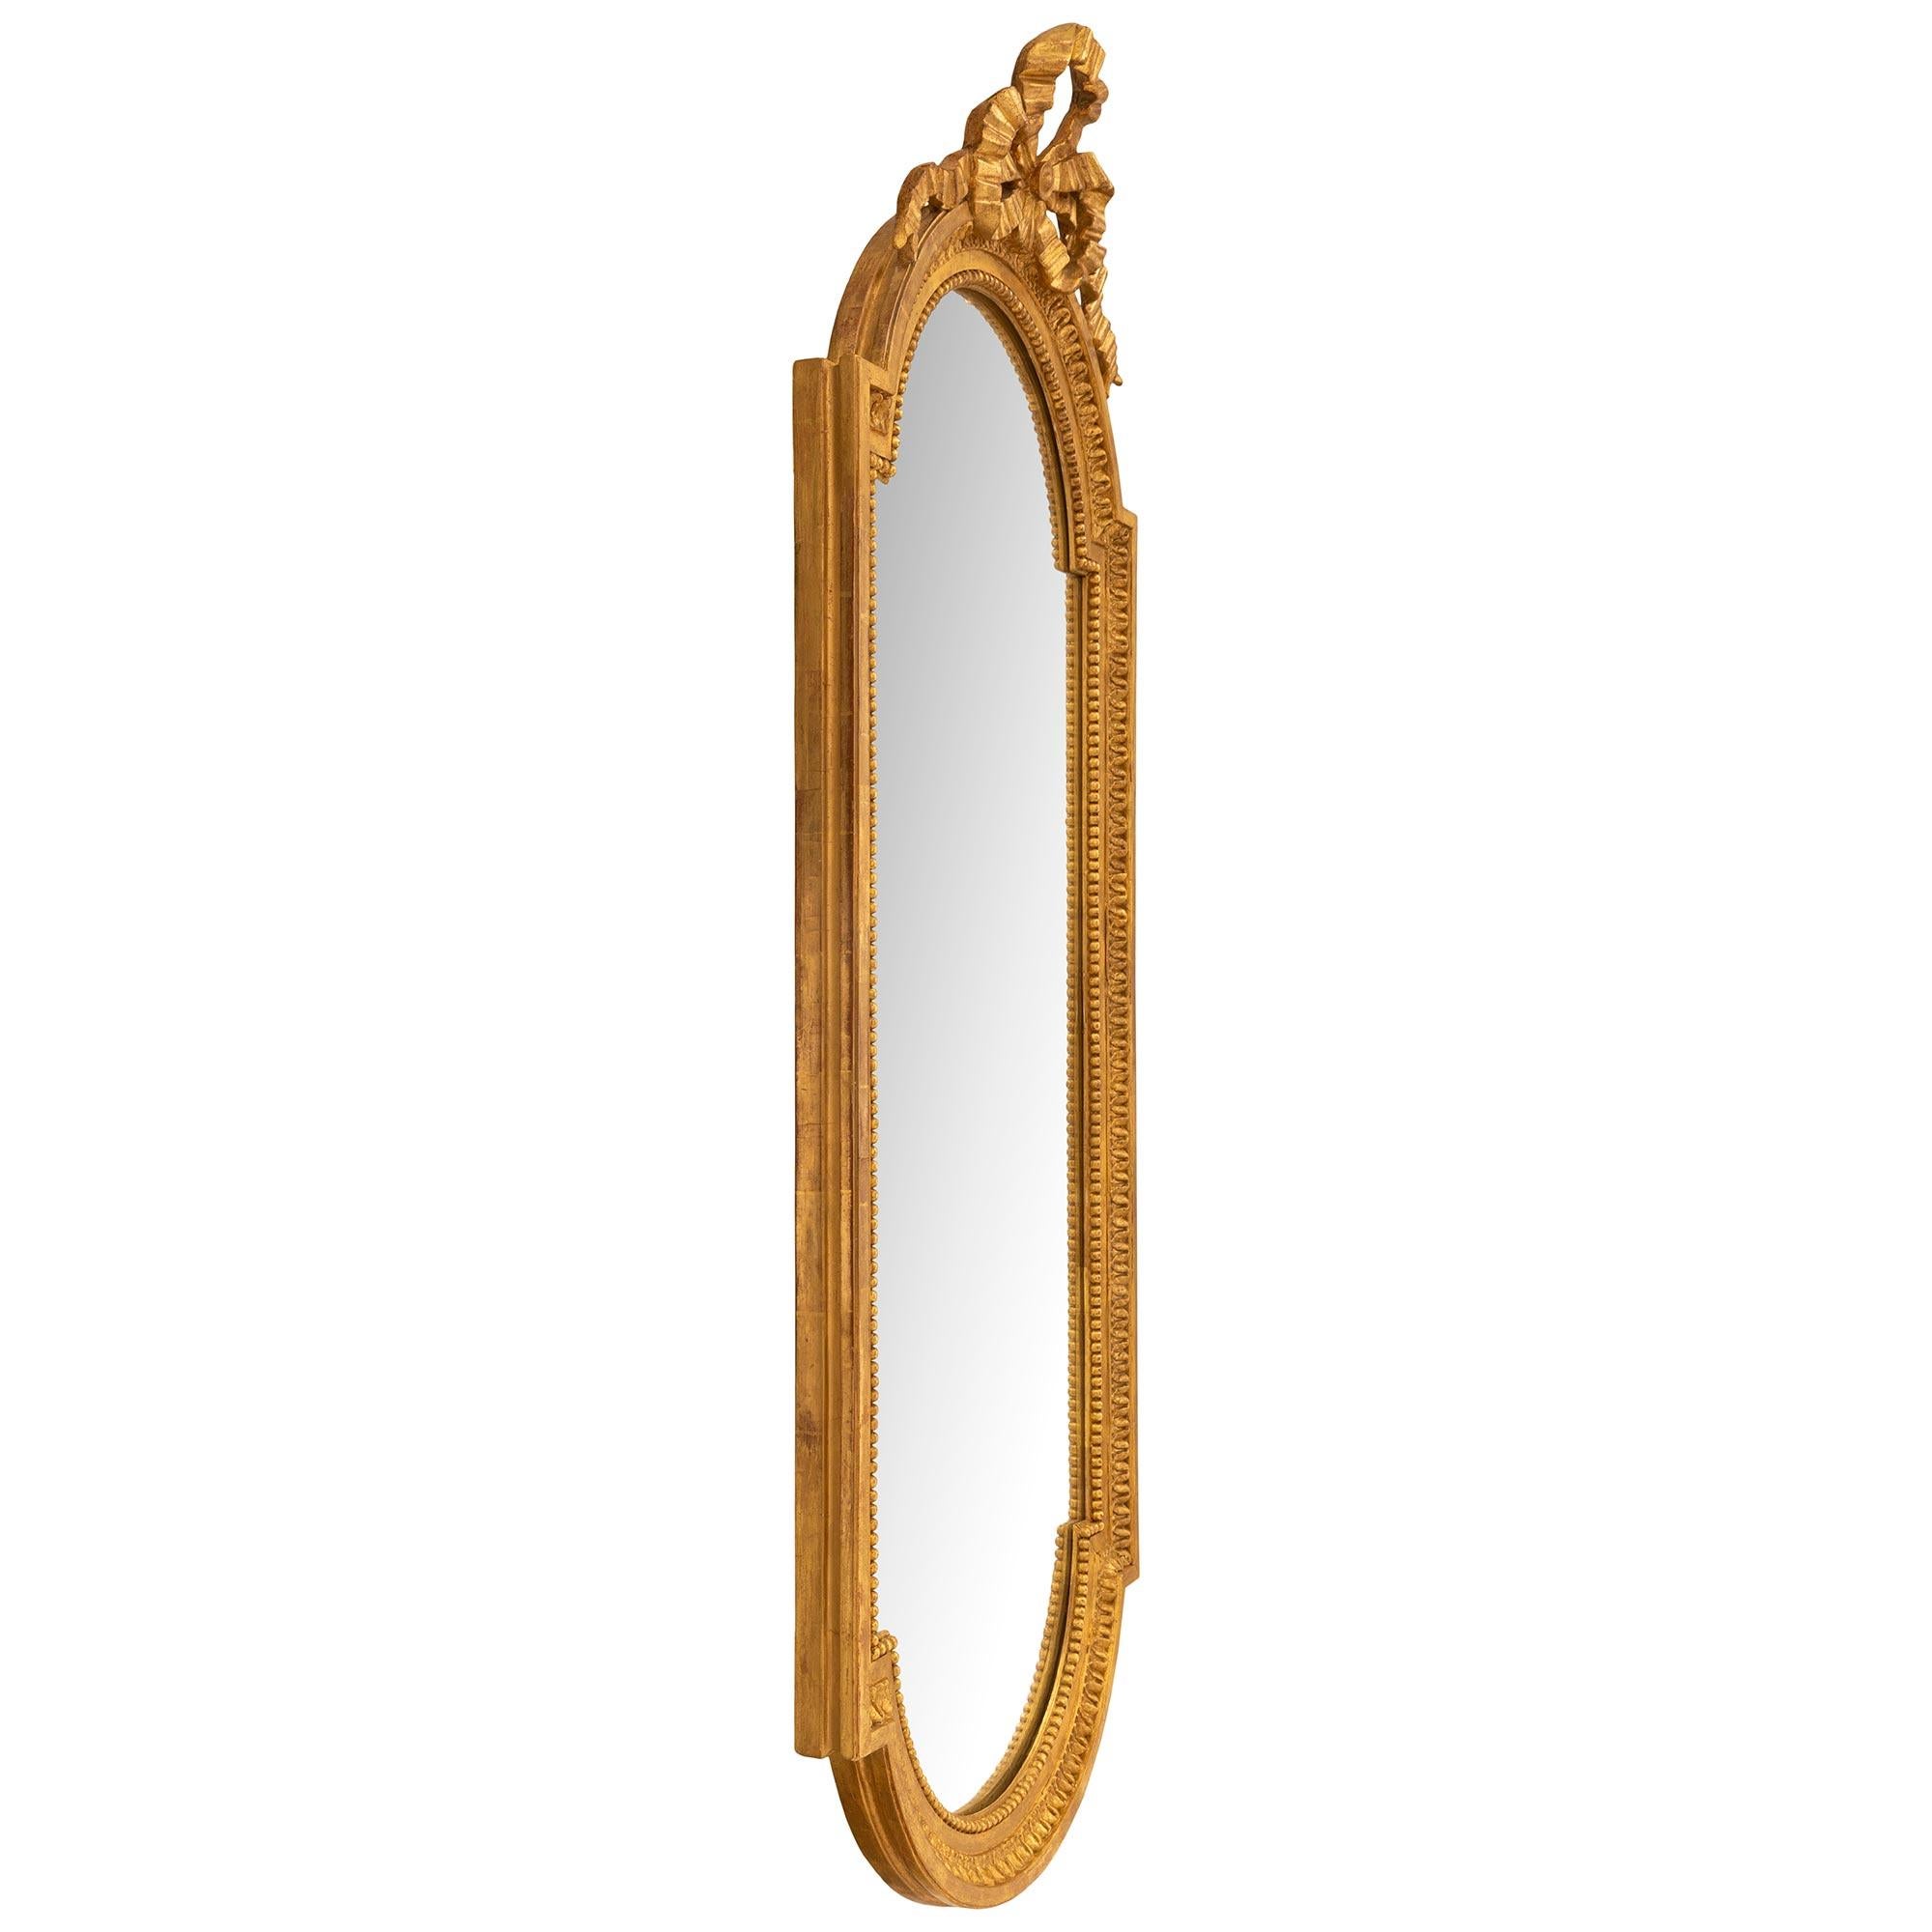 An elegant and unique French 19th century Louis XVI st. Giltwood mirror. The original mirror plate is framed within an elongated Giltwood band with inner beaded and outer Coeur de Rai designs all in a rich satin and burnished finish. The top and